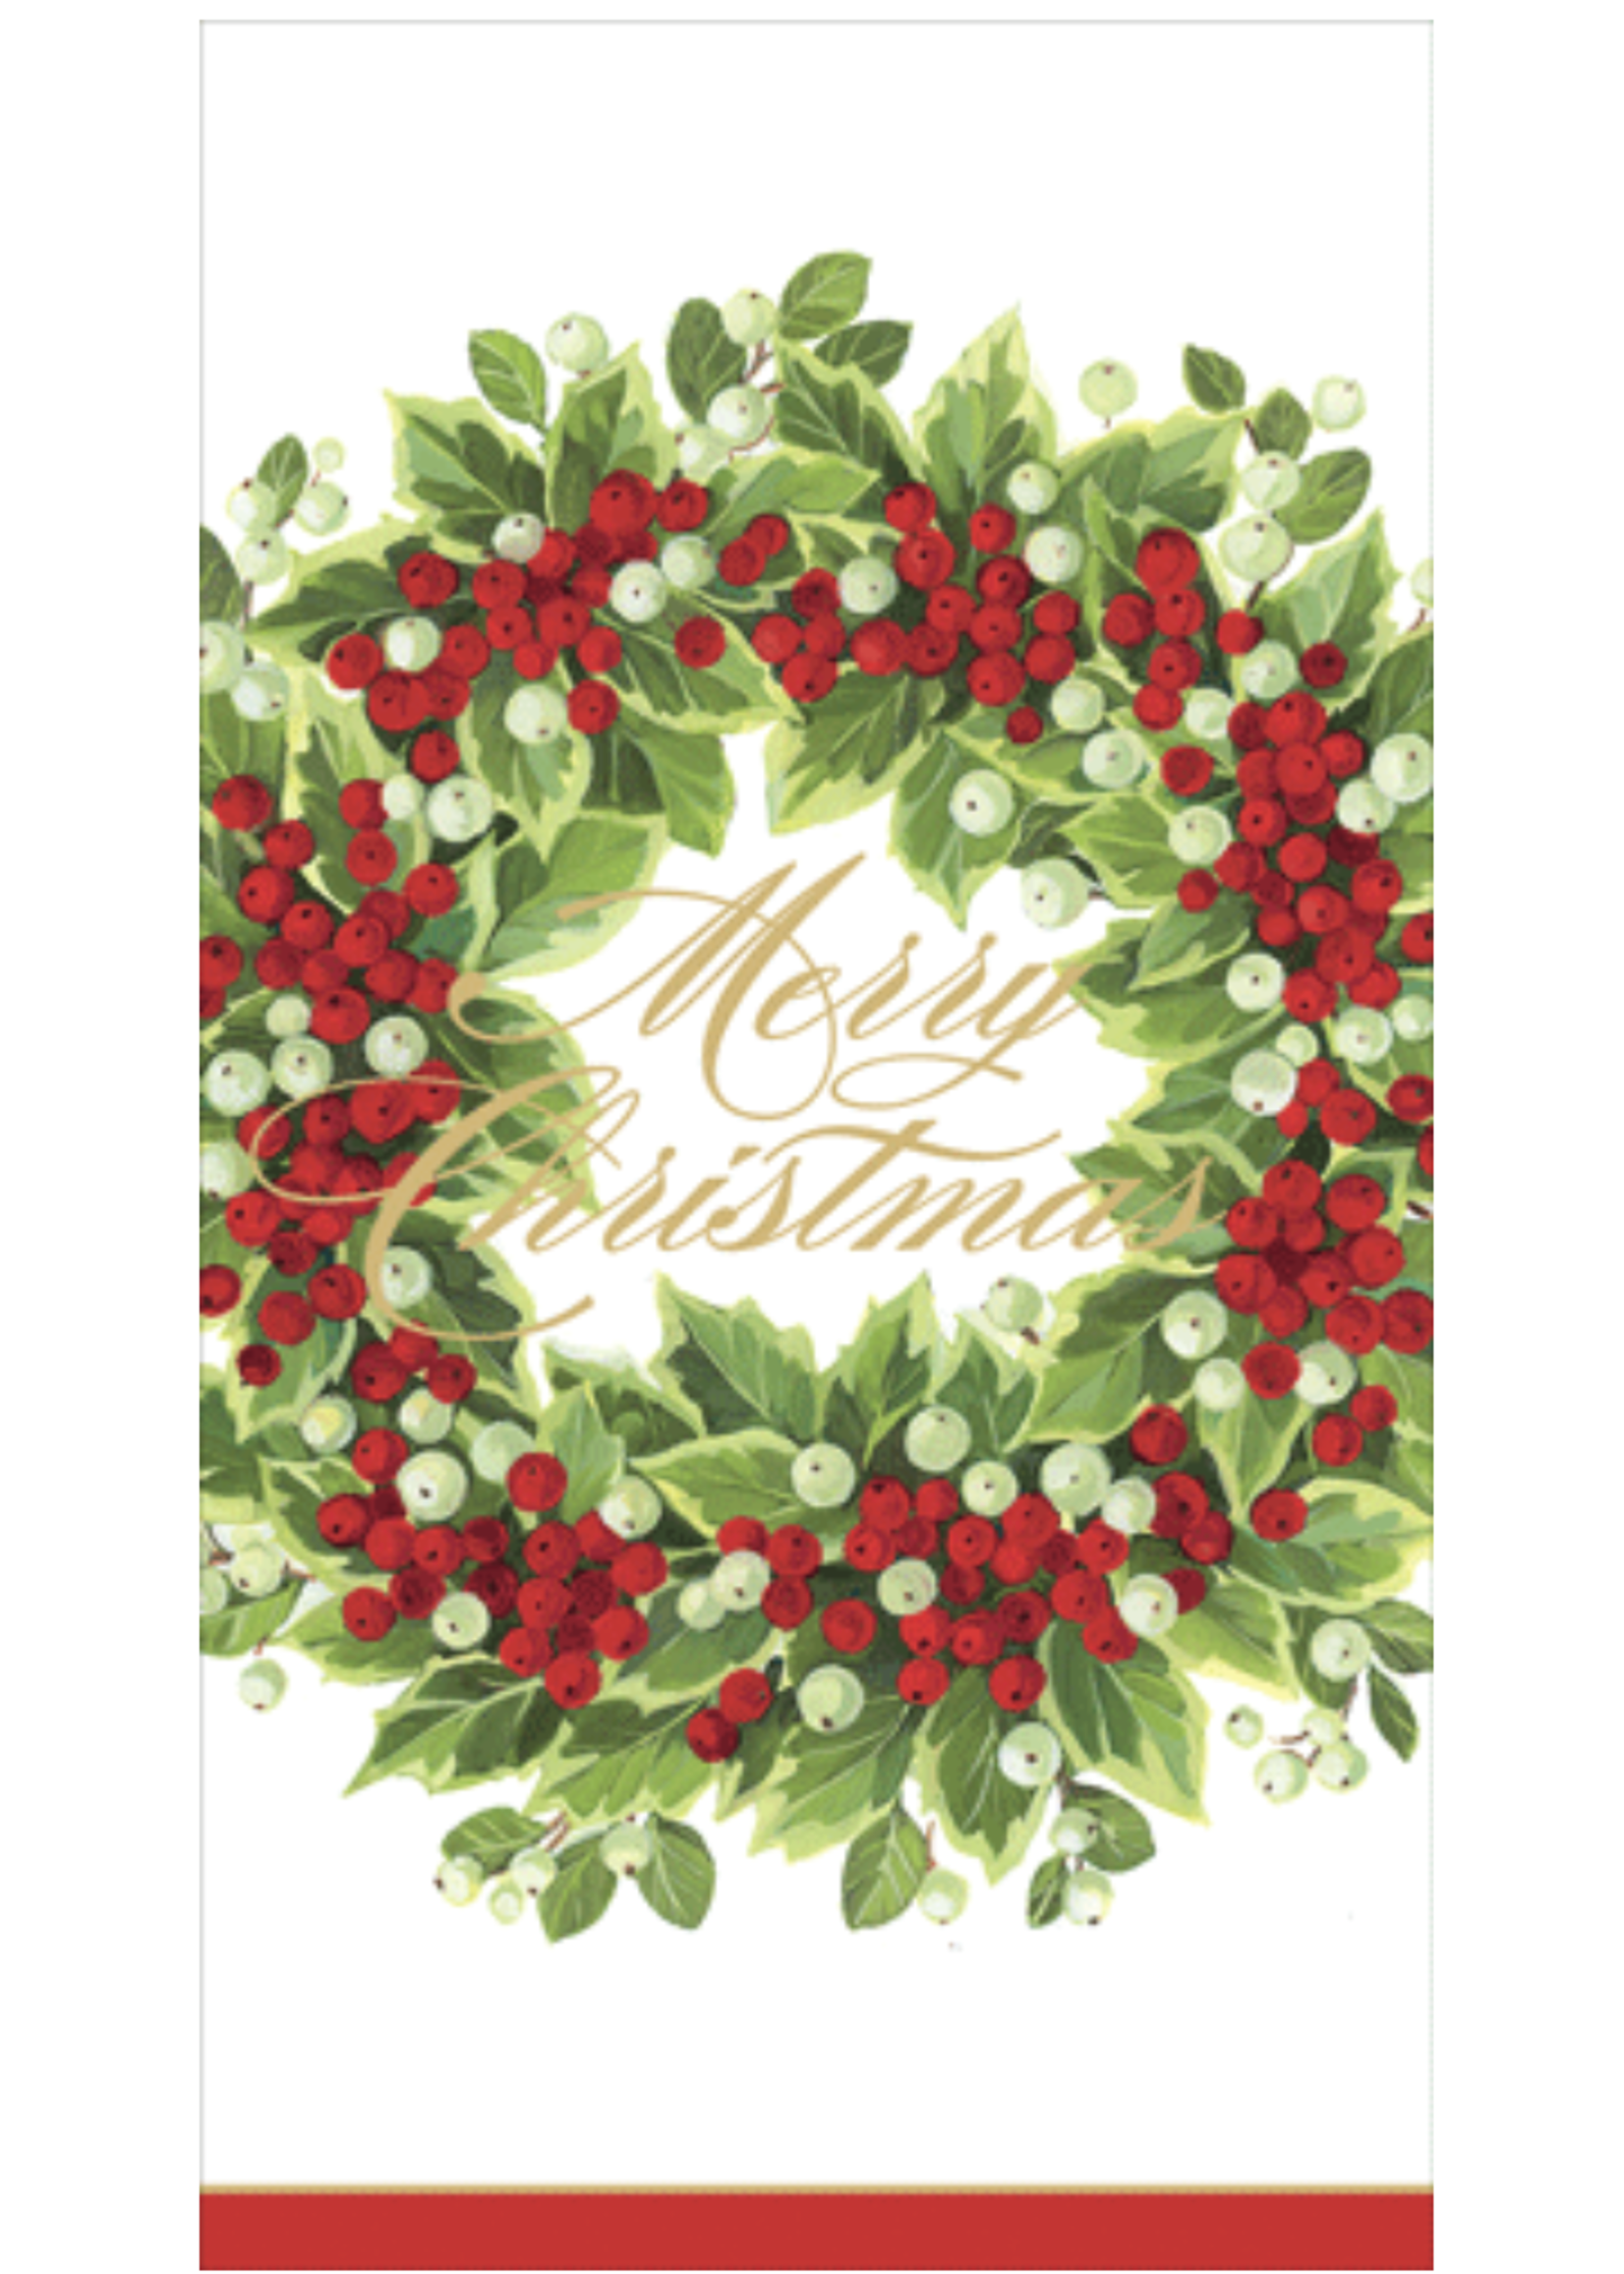 Caspari Guest Towels : Holly and Berry Wreath Merry Christmas